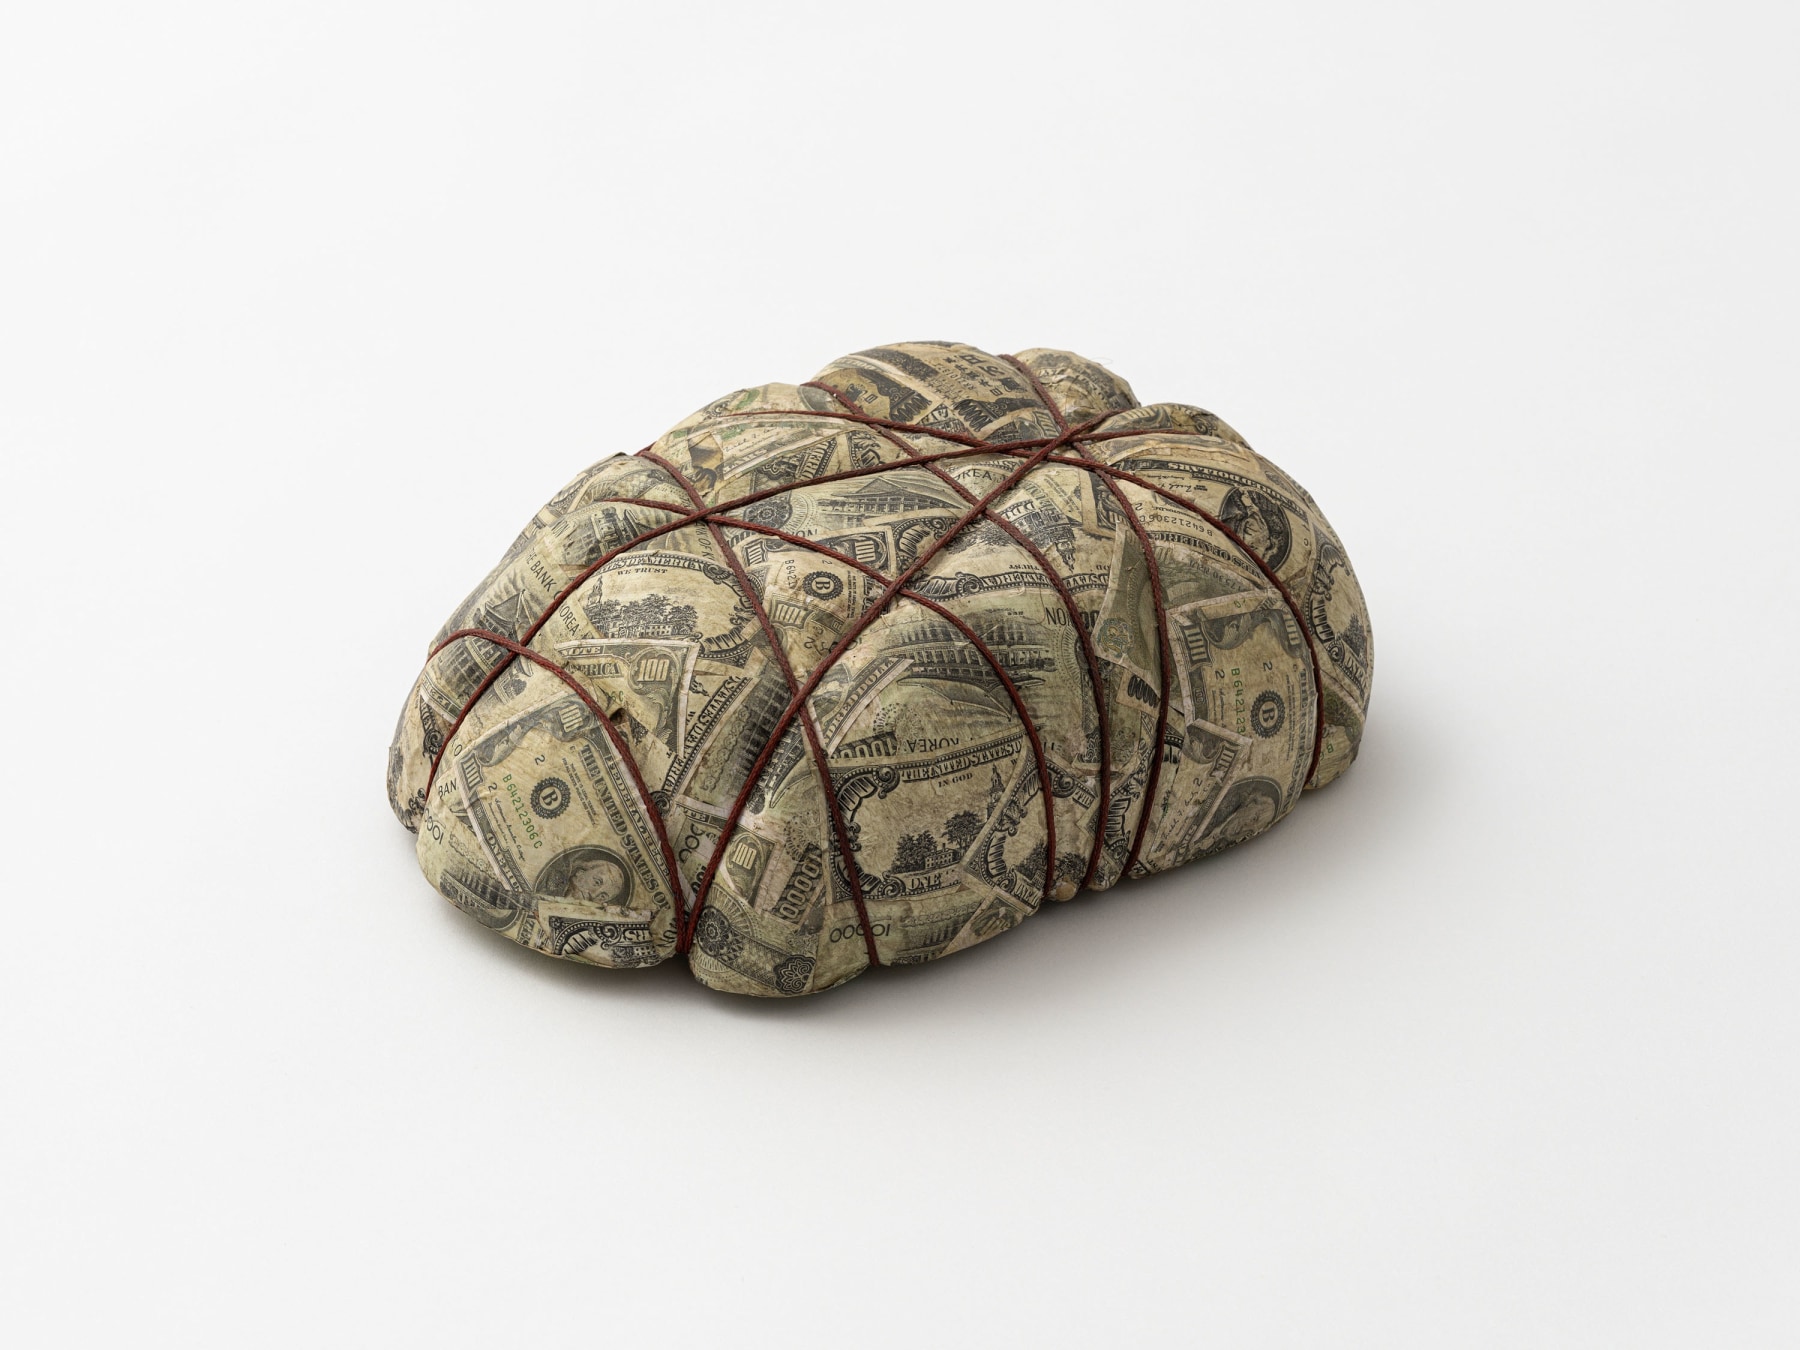 Seung-taek Lee

&amp;ldquo;Tied Money&amp;rdquo;, 1985

Paper, rope

8 3/4 x 12 3/4 x 4 inches

22 x 33 x 10 cm

LEE 25

$75,000